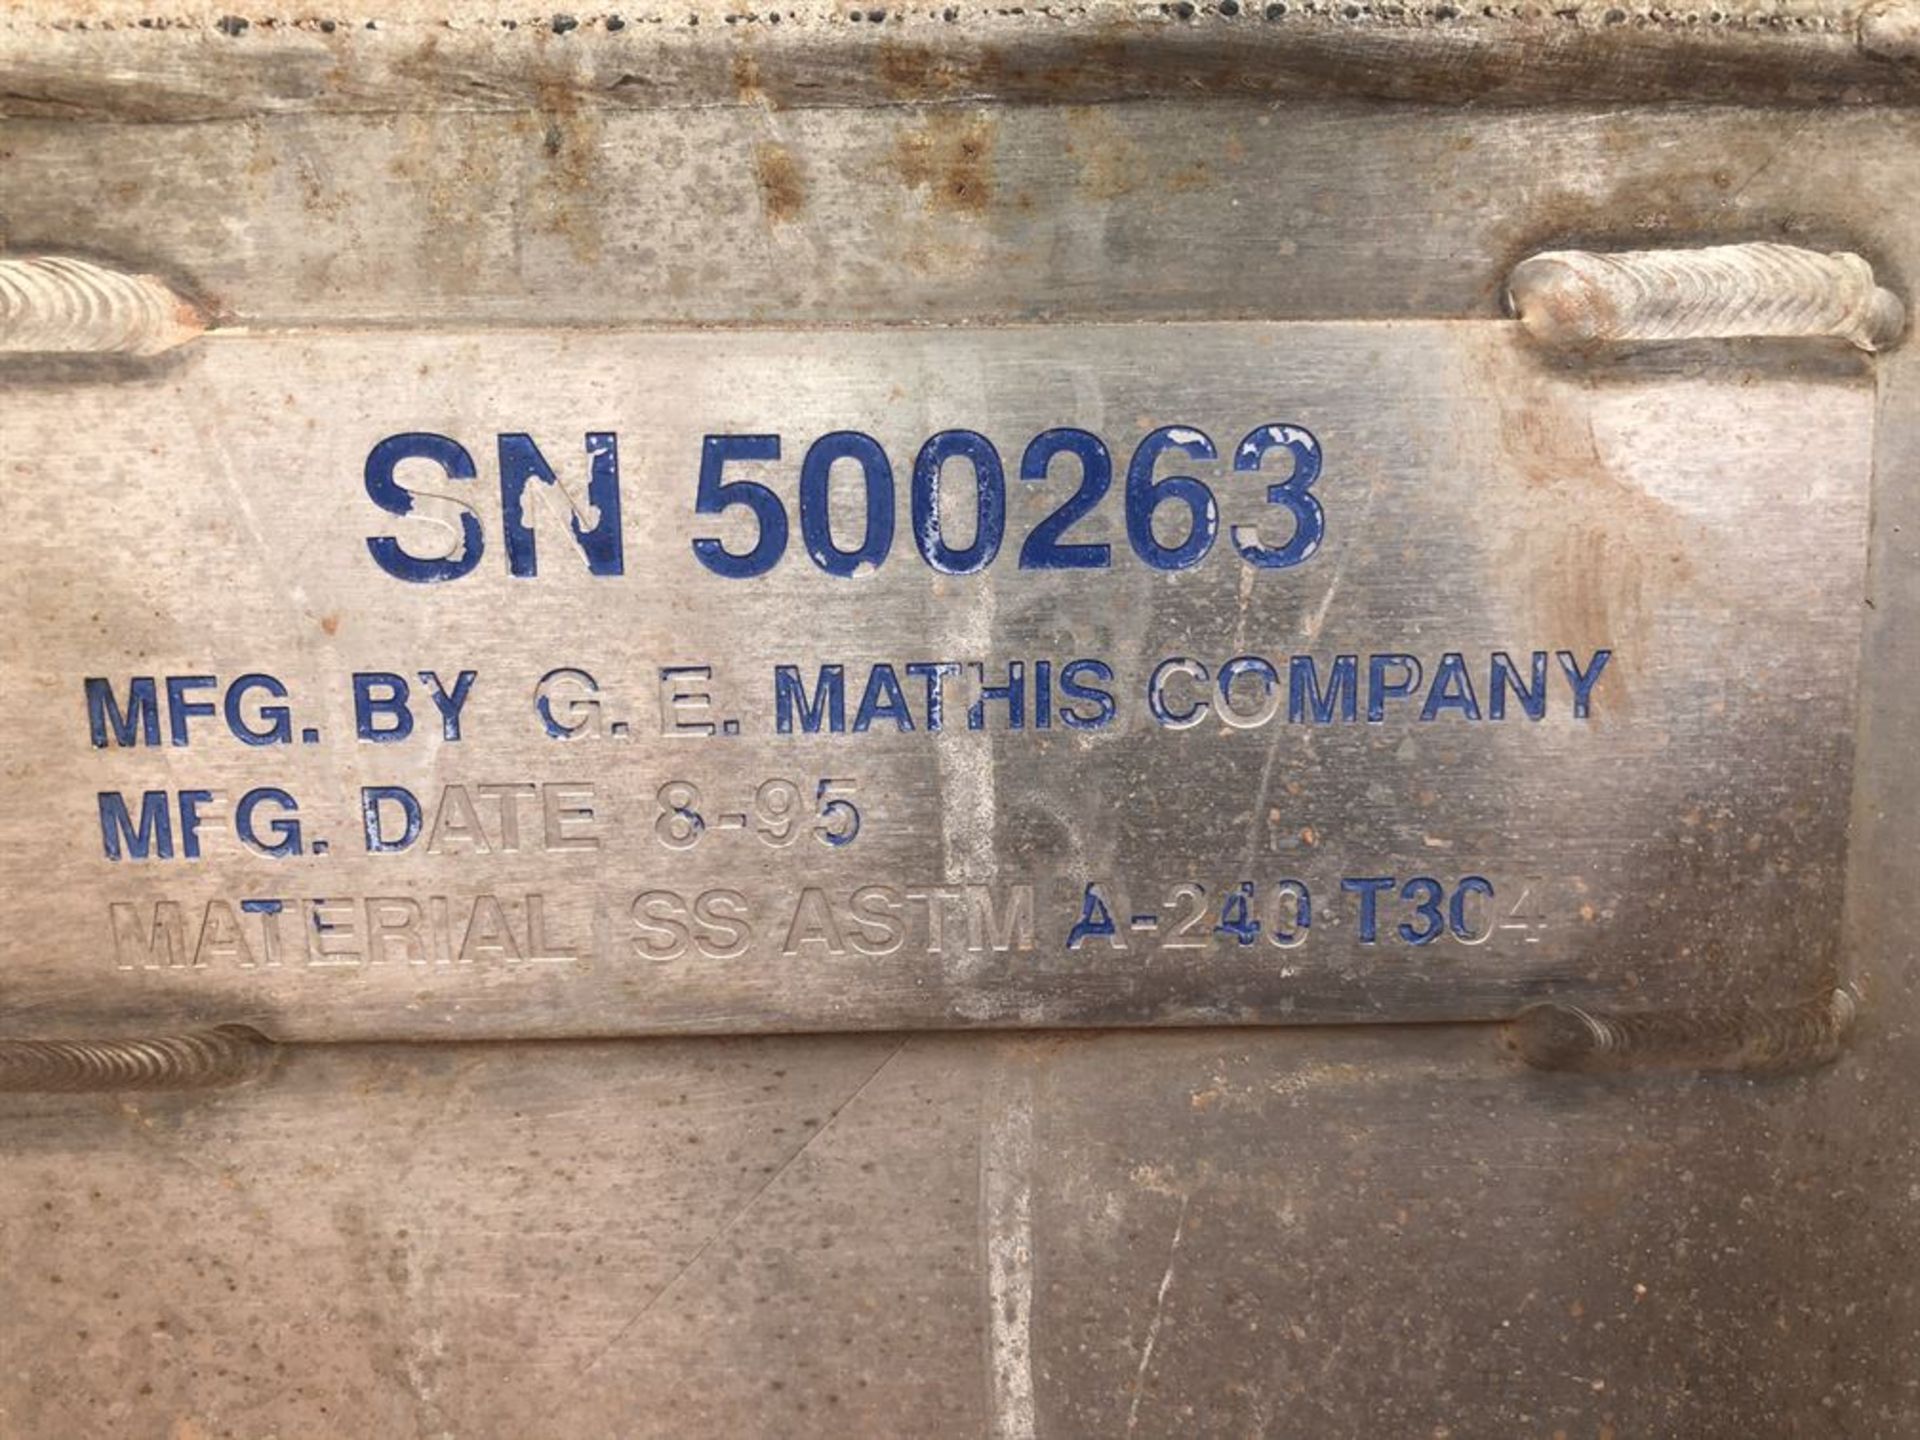 GE MATHIS Unknown Capacity Stainless Steel Liquid Storage Tank (Location: Lubrication) - Image 2 of 2